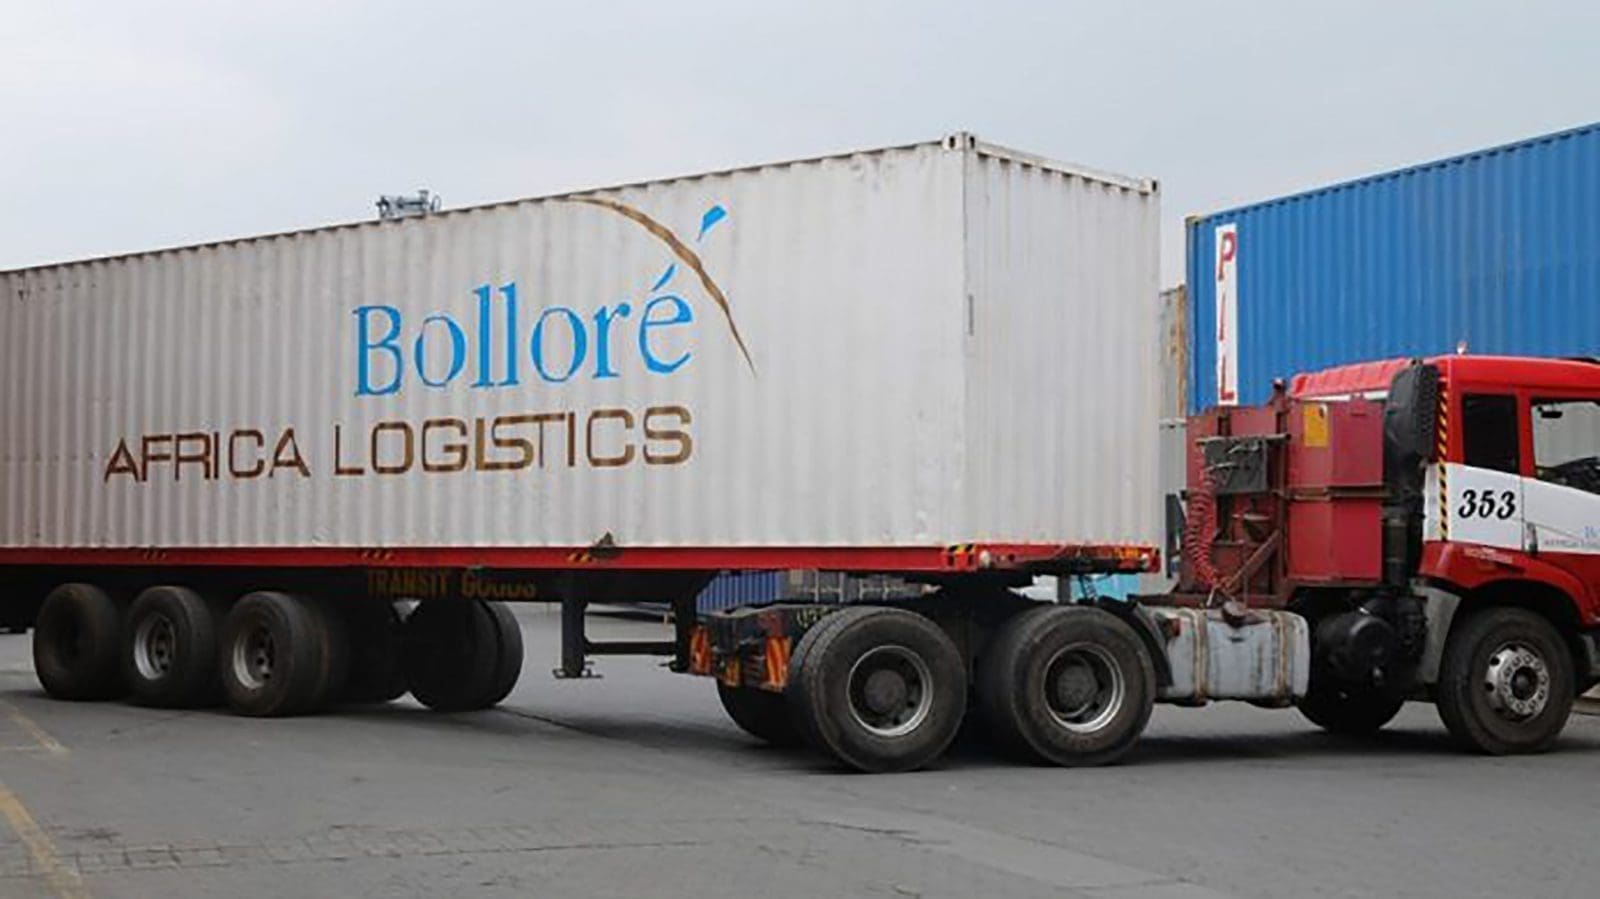 Global shipping company MSC to buy Bollore’s Africa logistics unit for US$6.3 billion